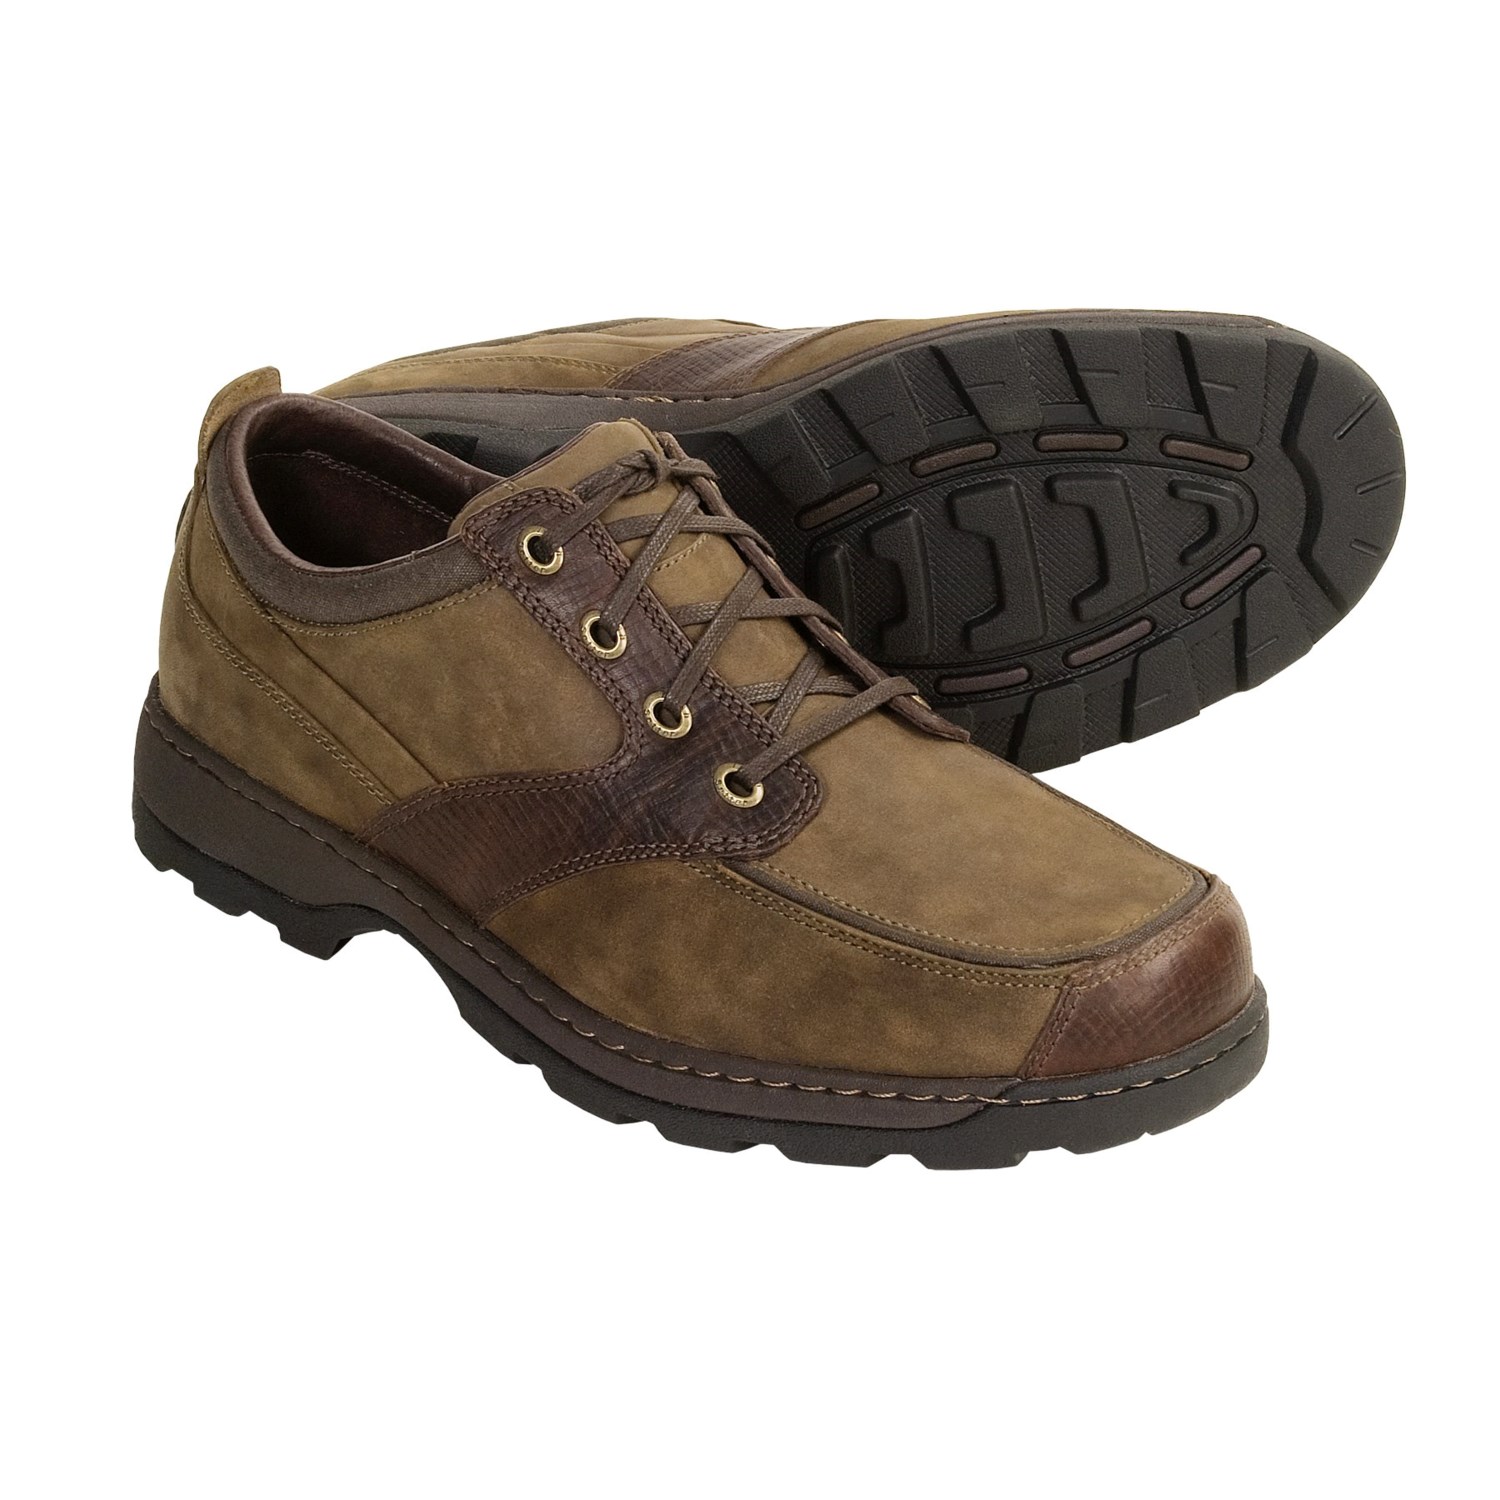 Irish Setter Soft Paws Oxford Shoes (For Men) 2579A - Save 36%